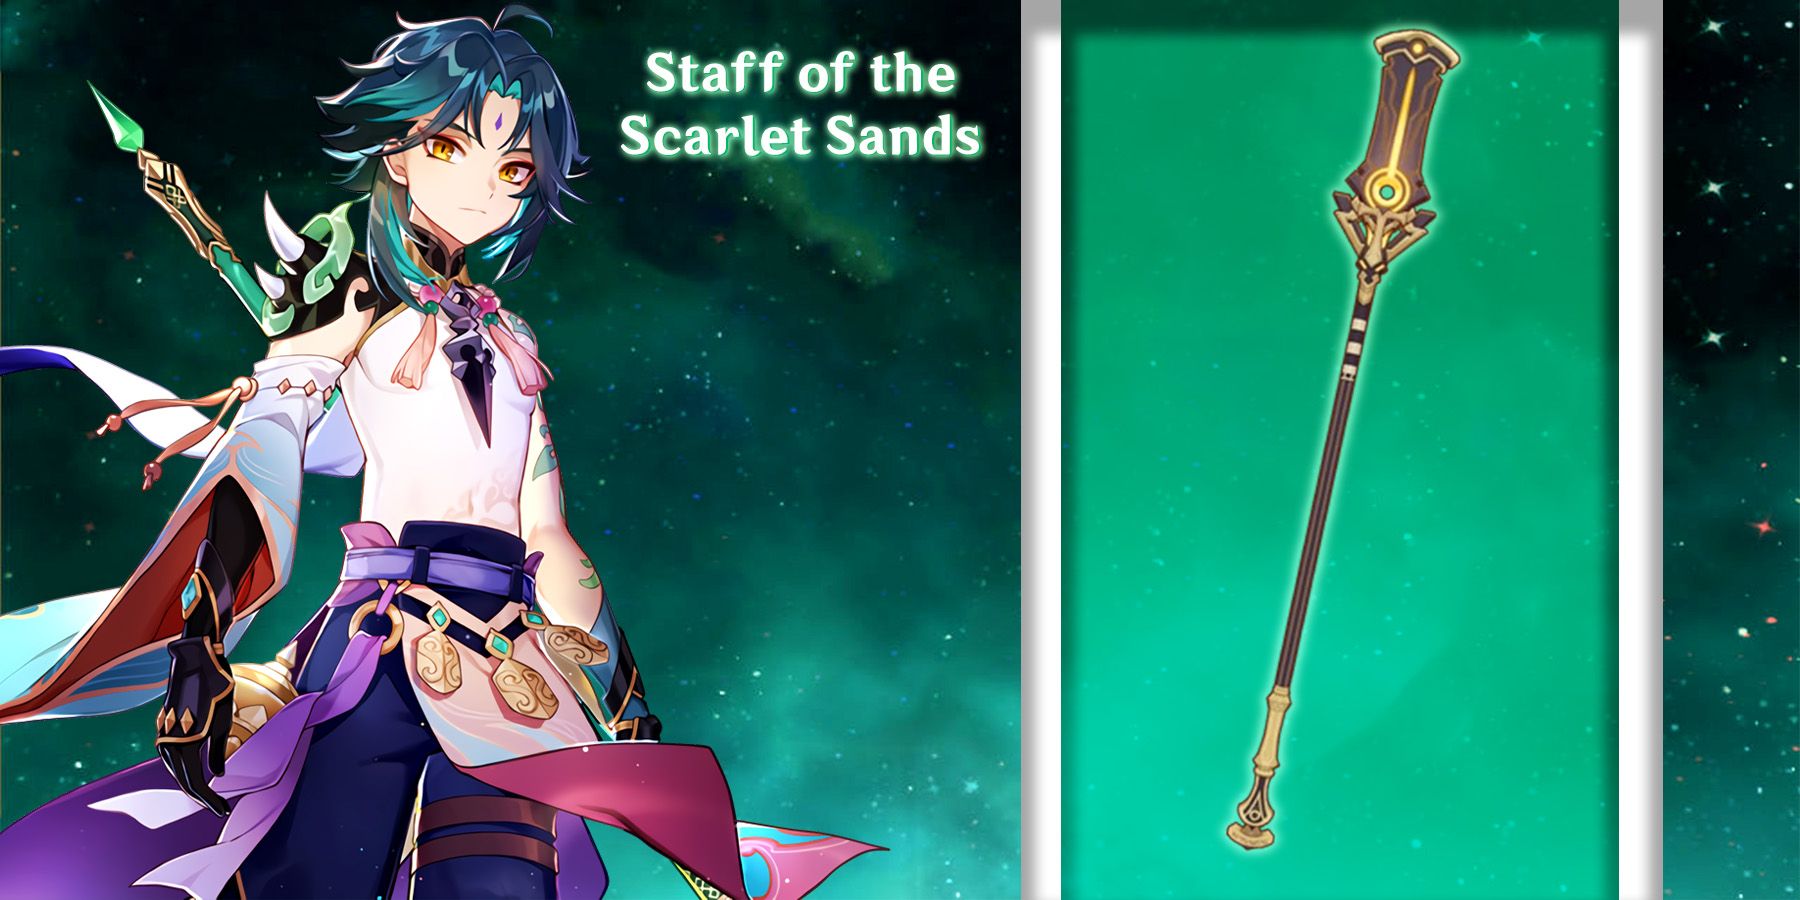 xiao using staff of the scarlet sands in genshin impact